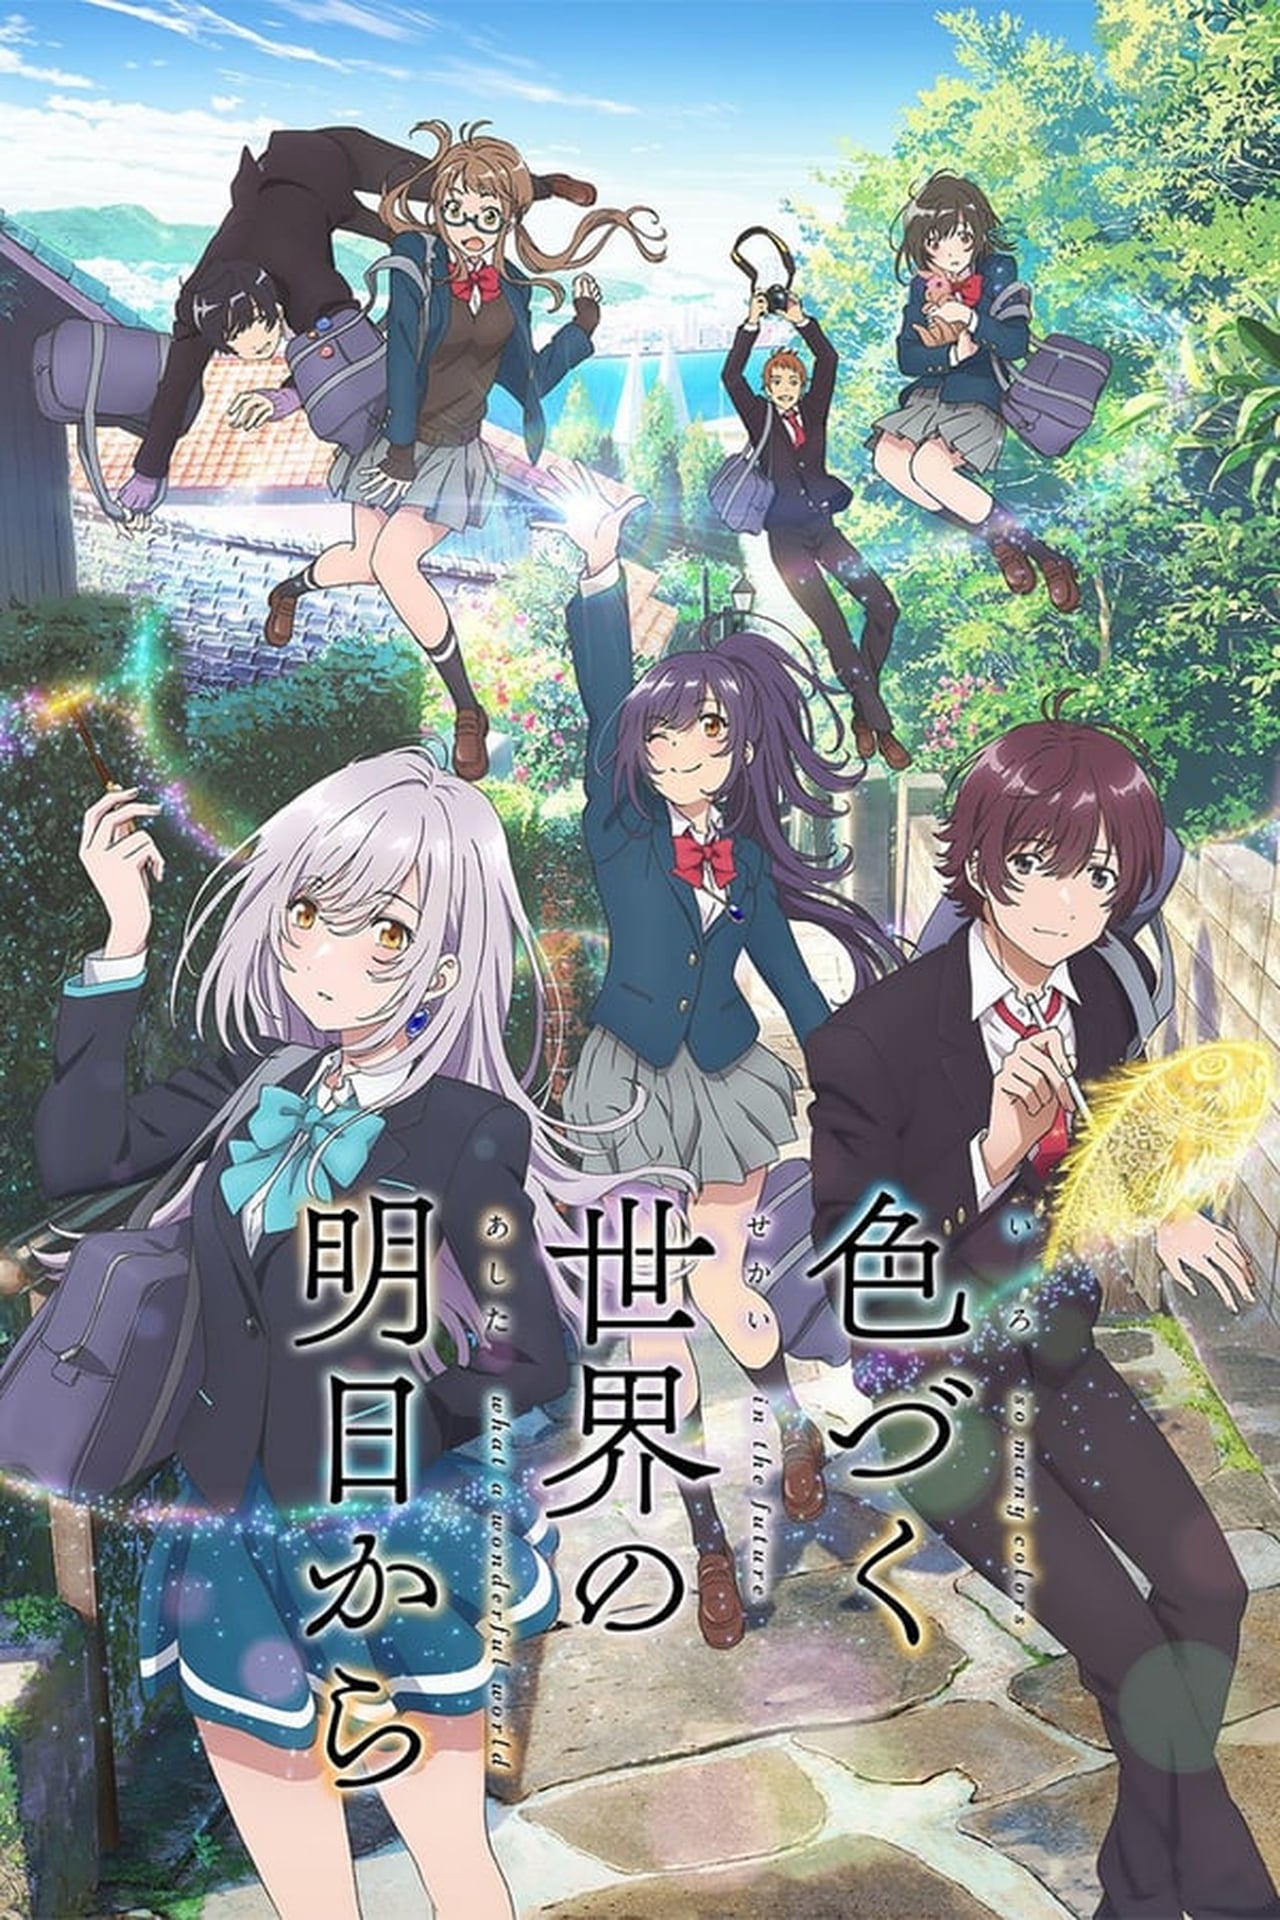 IRODUKU: The World In Colors (2018)